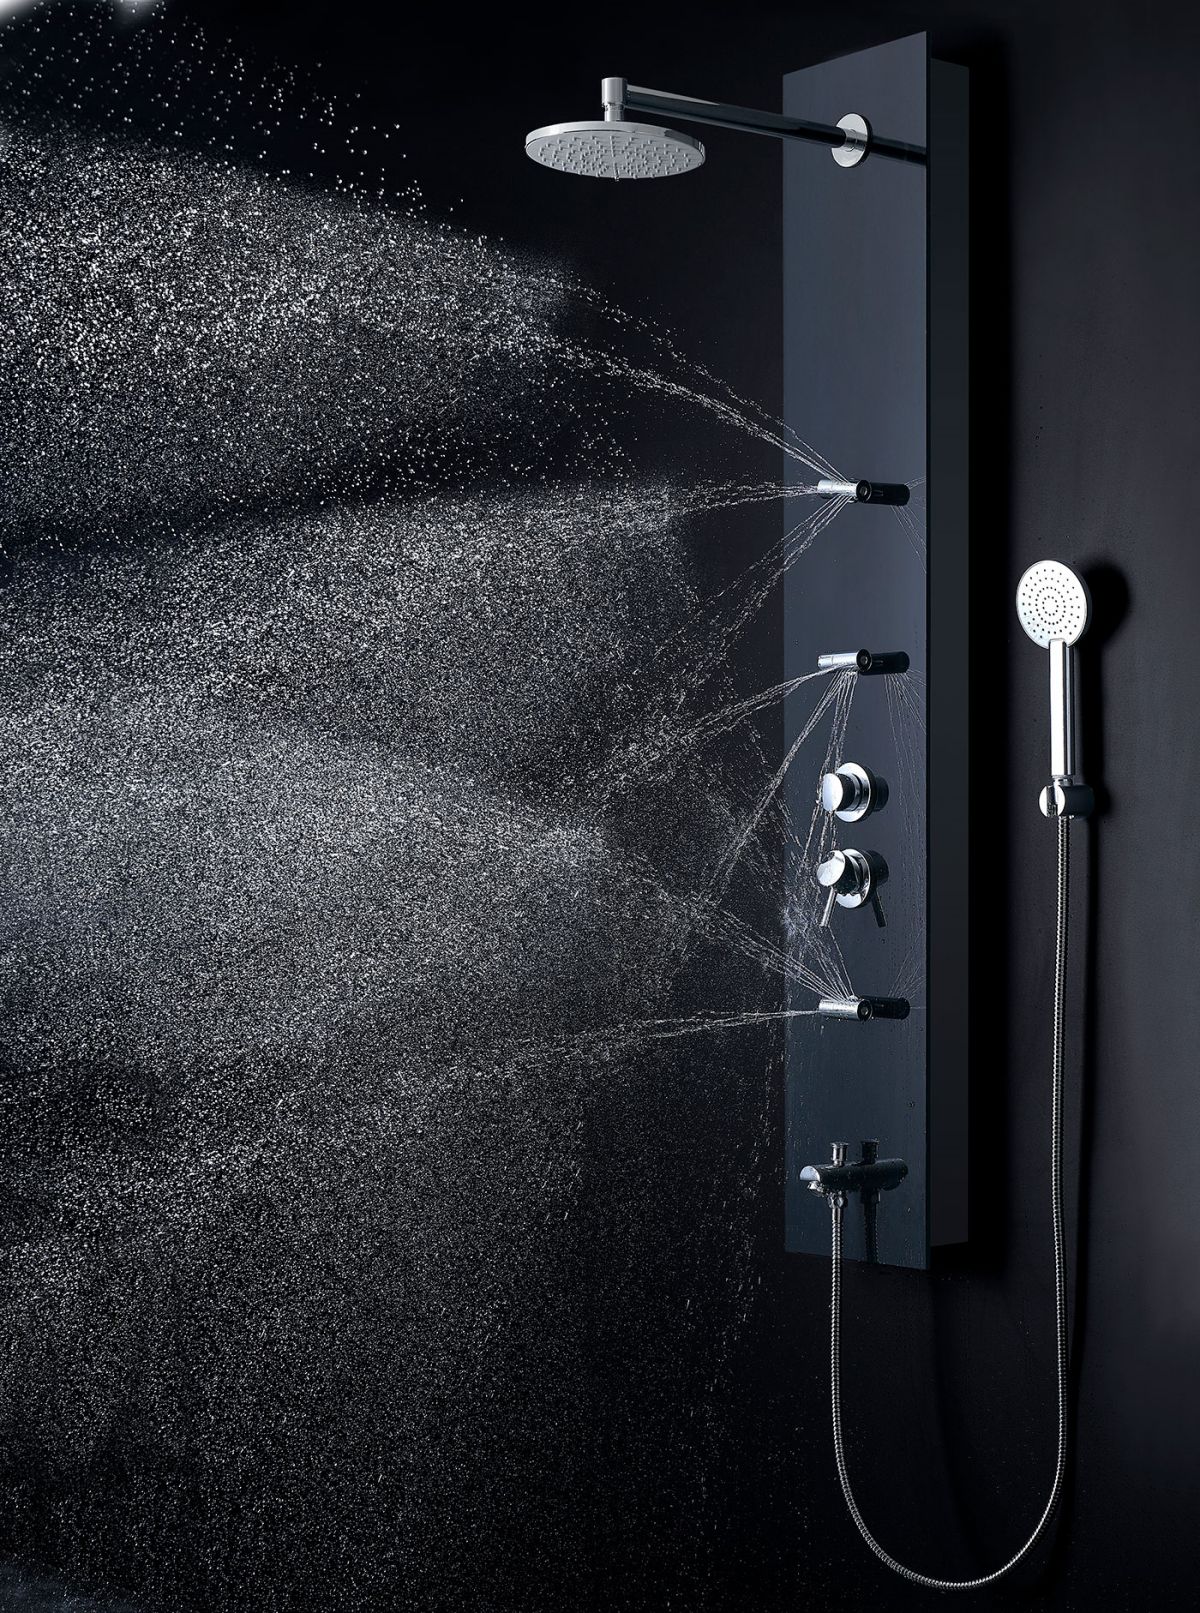 The Best Rain Shower Heads of 2022 - Tested by Bob Vila